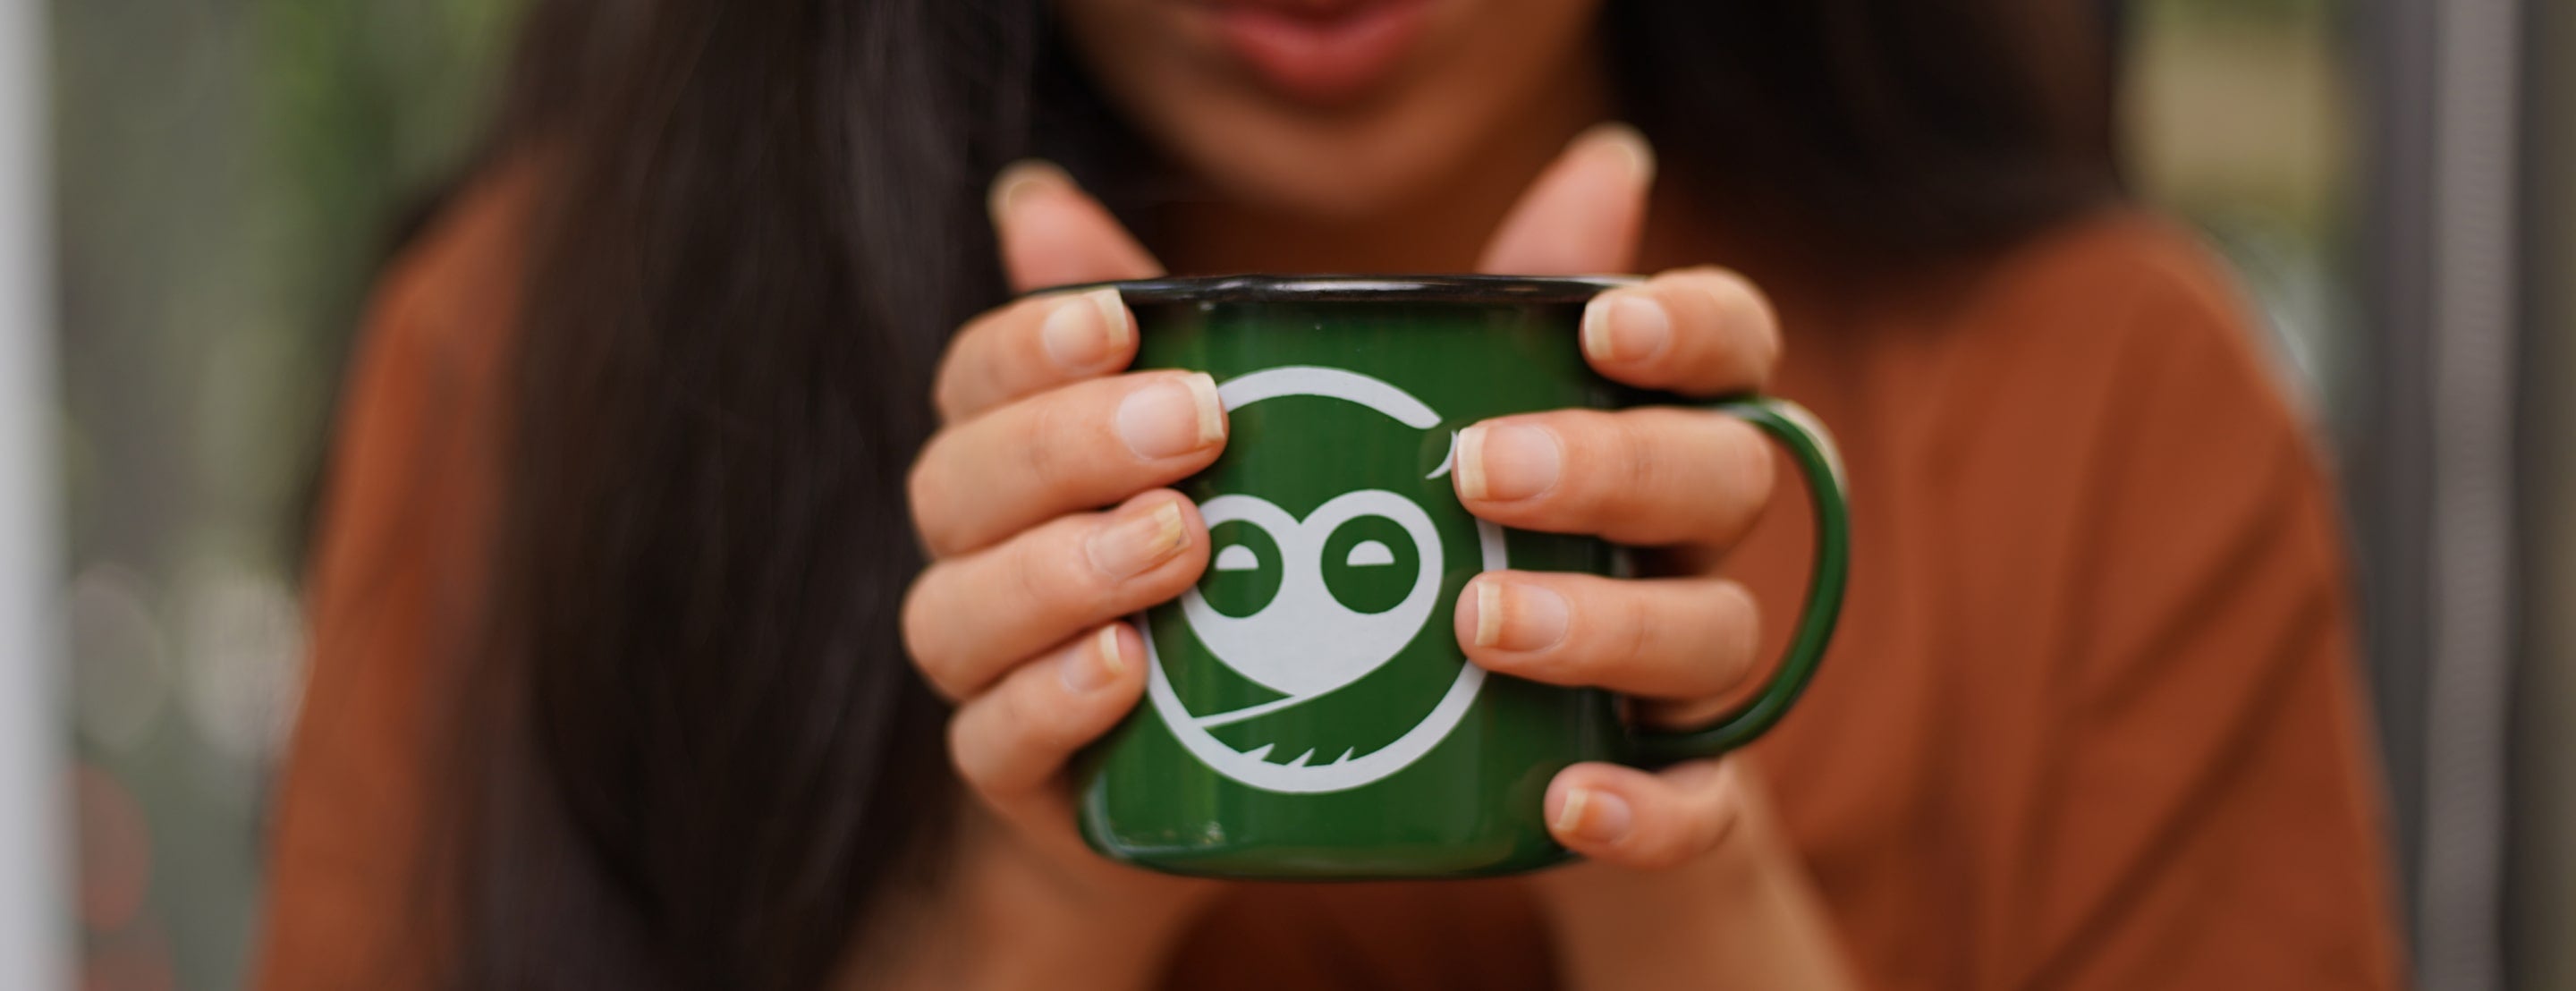 Everything You Much Know About Enamel Mugs-An Ultimate Guide – Sleepy Owl  Coffee